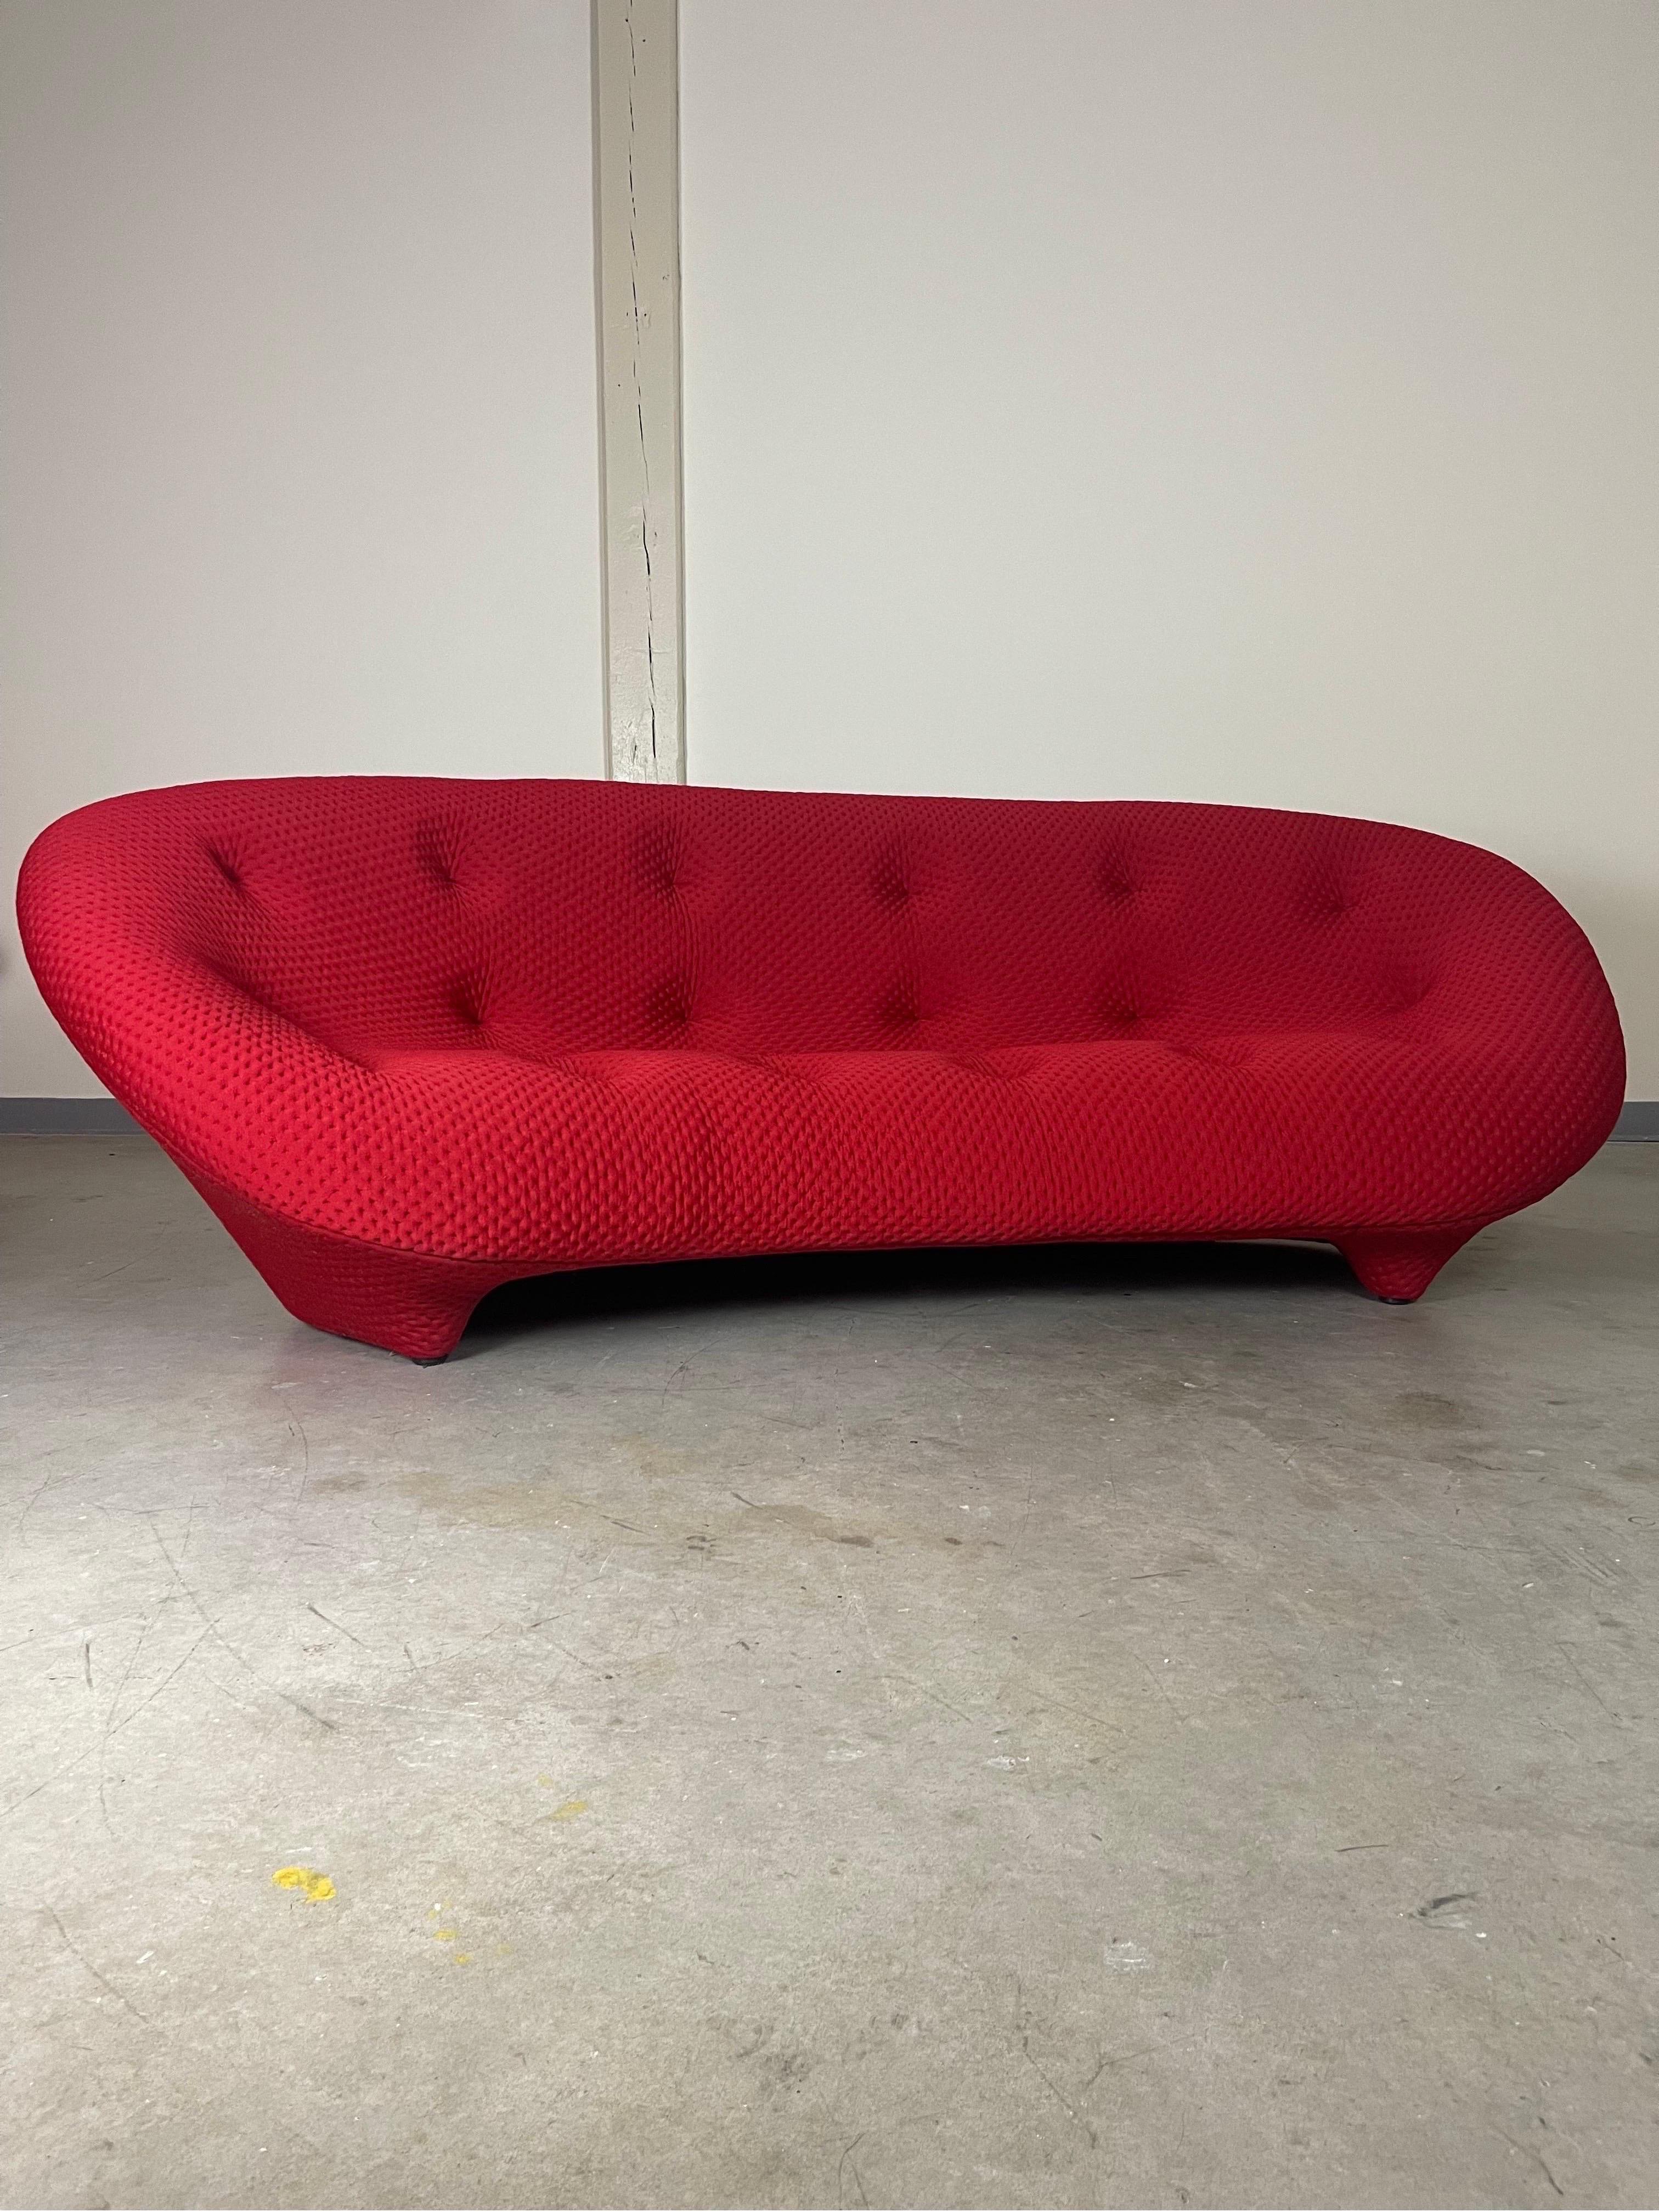 “Ploum” sofa designed by R. & E. Bouroullec for Ligne Roset. Foam and shape of the sofa offers extreme comfort as it molds to the body. Minimal wear and use present. Covers manufactured for this sofa by Ligne Roset are able to be replaced by an